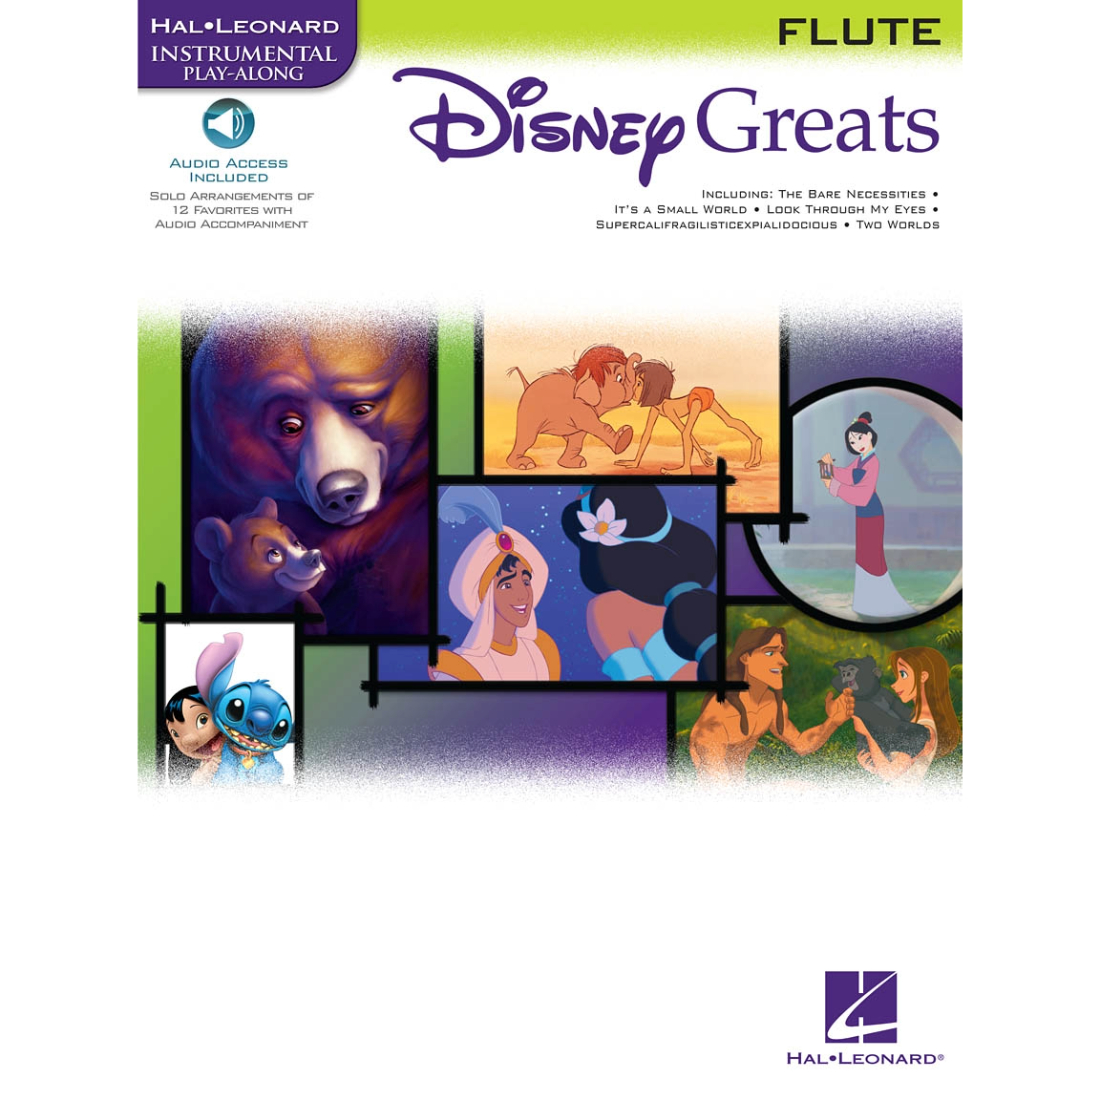 White cover with images from Disney movies, titled Disney greats